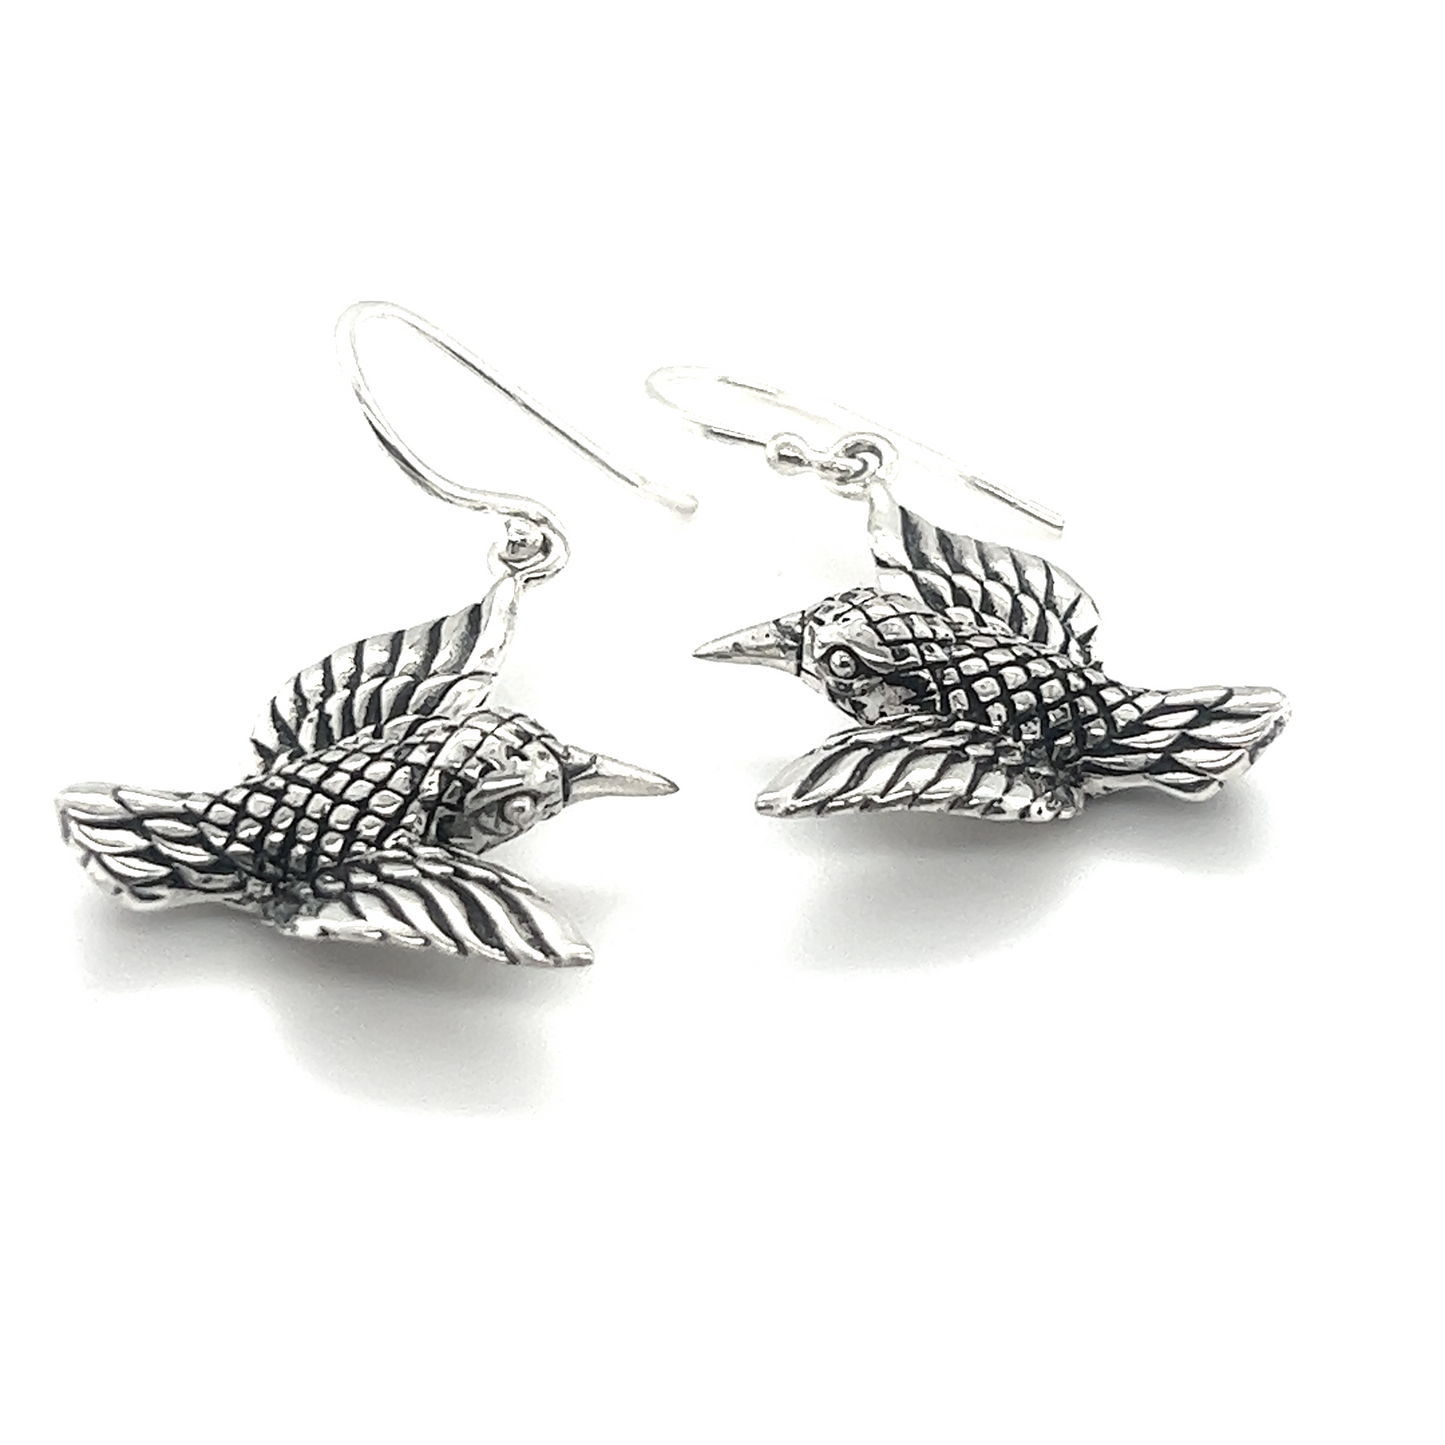 Detailed Hummingbird earrings by Super Silver.